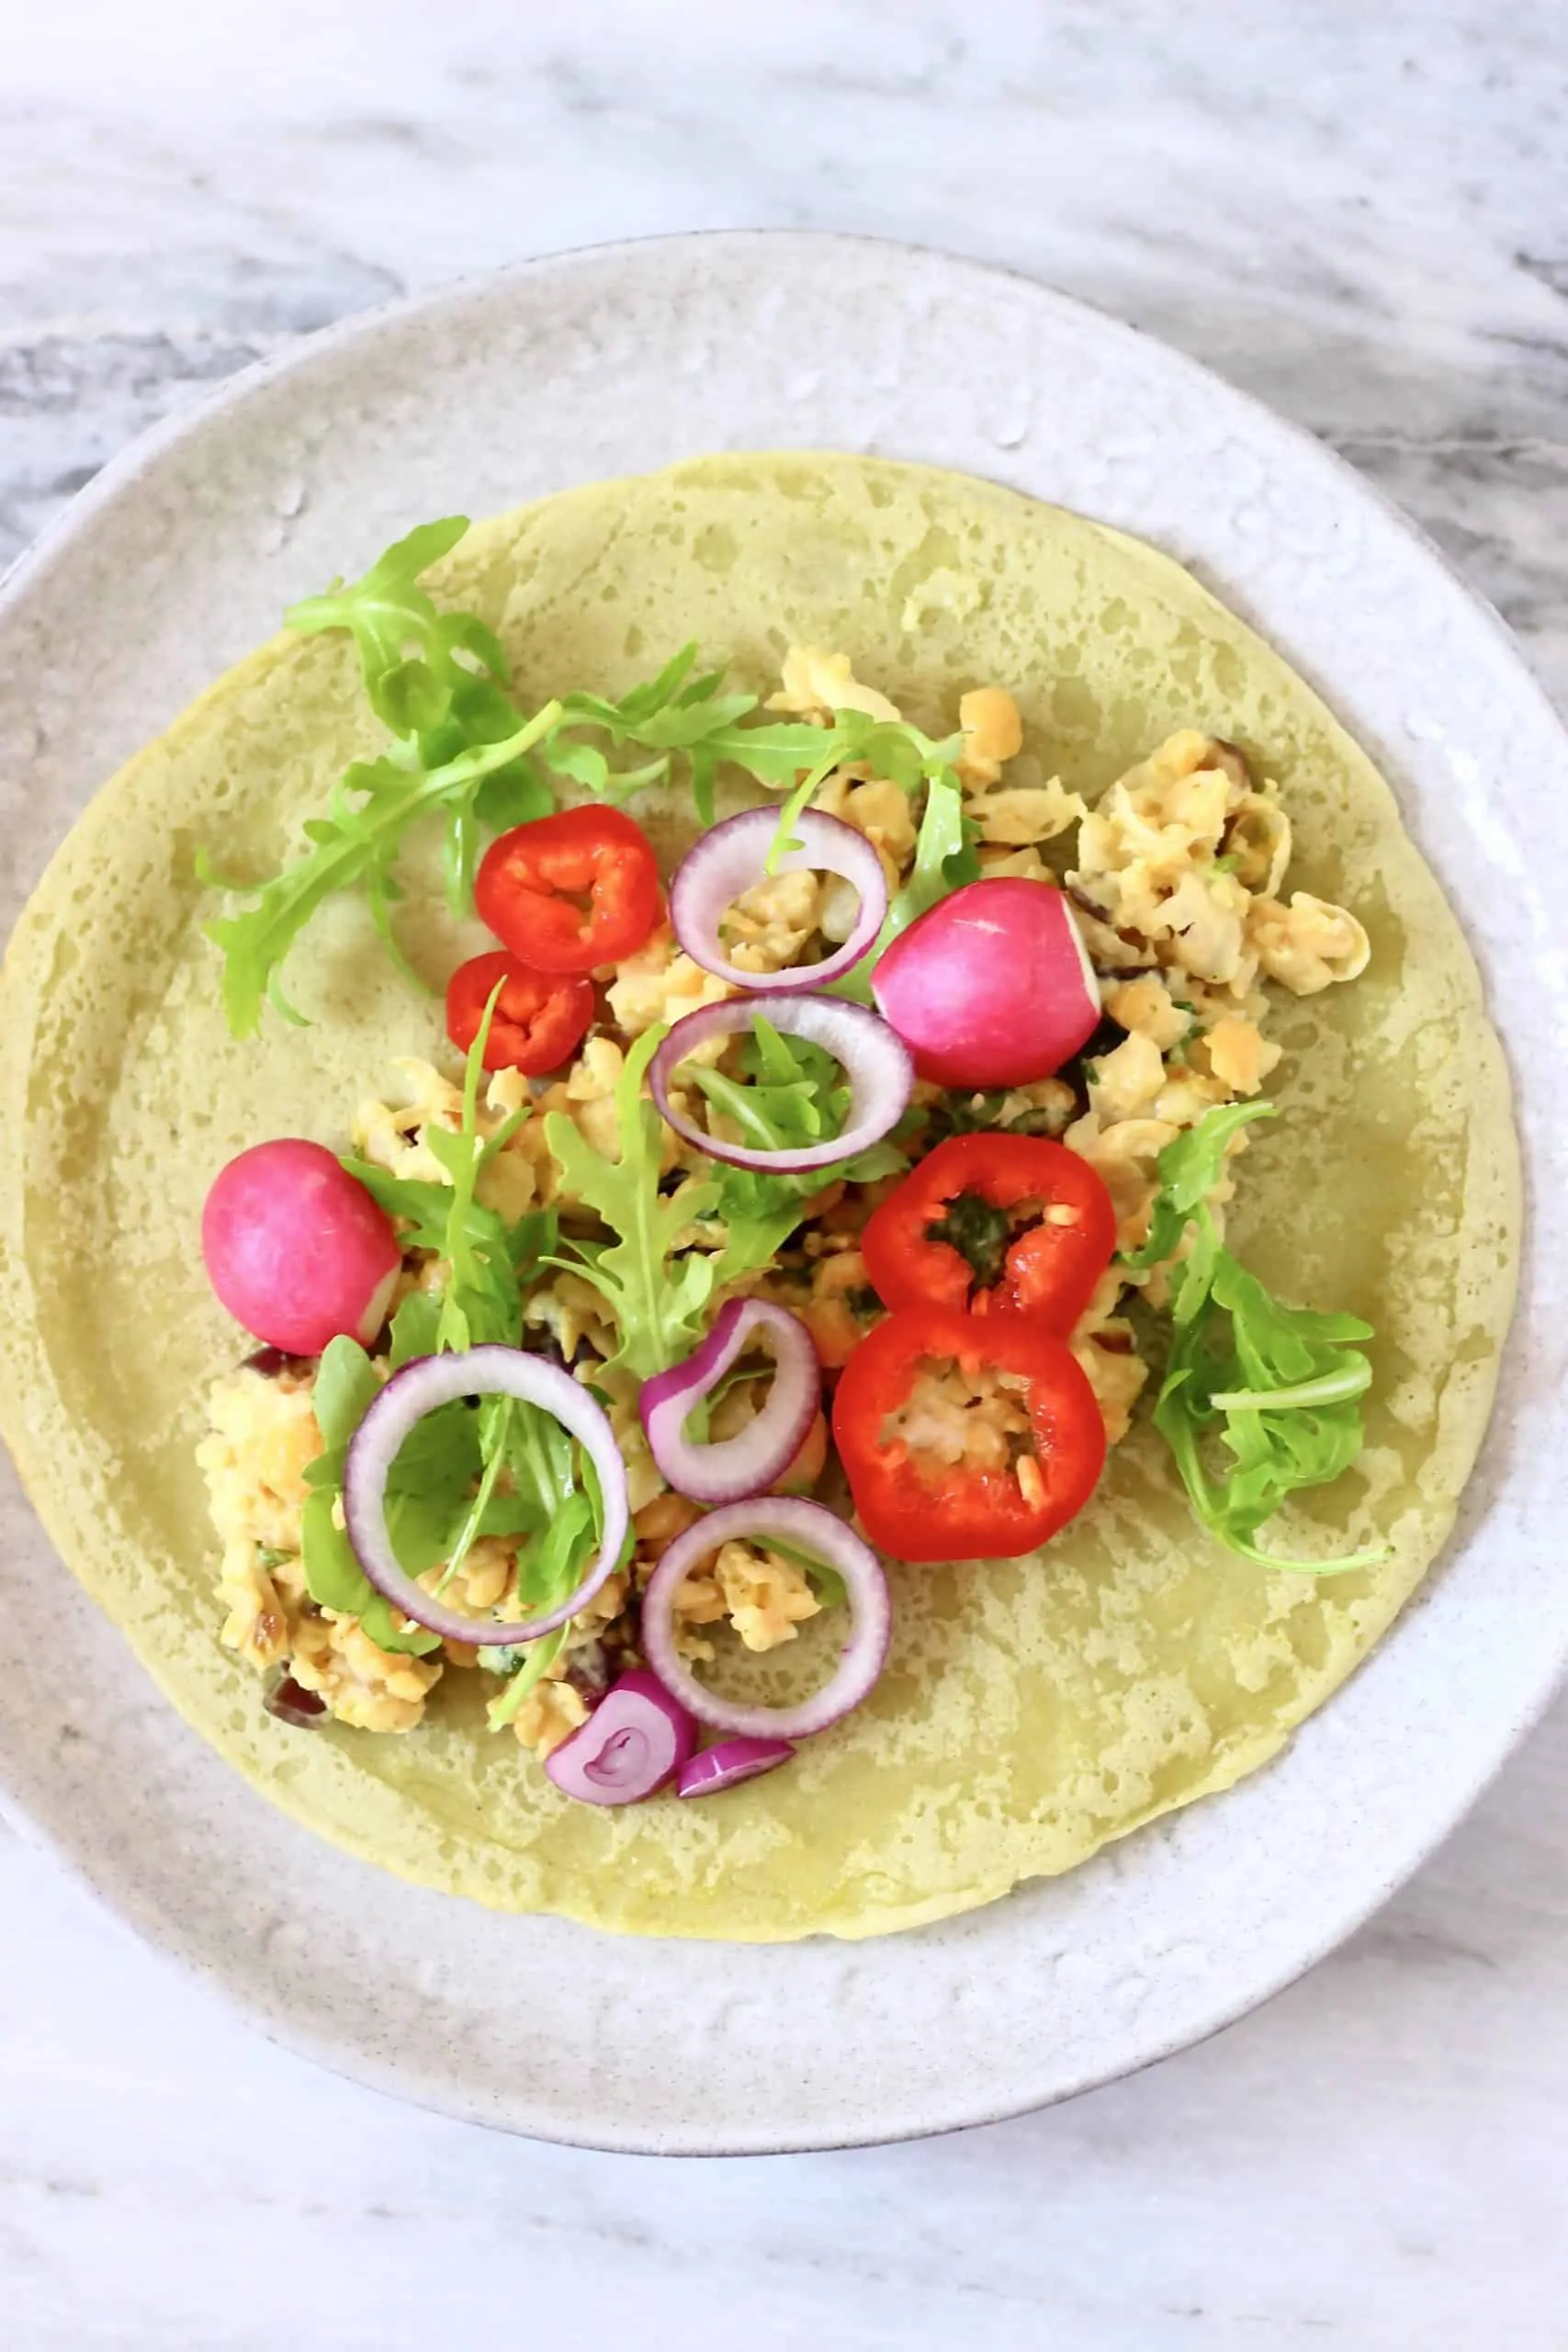 A green gluten-free vegan wrap topped with beans and salad on a white plate